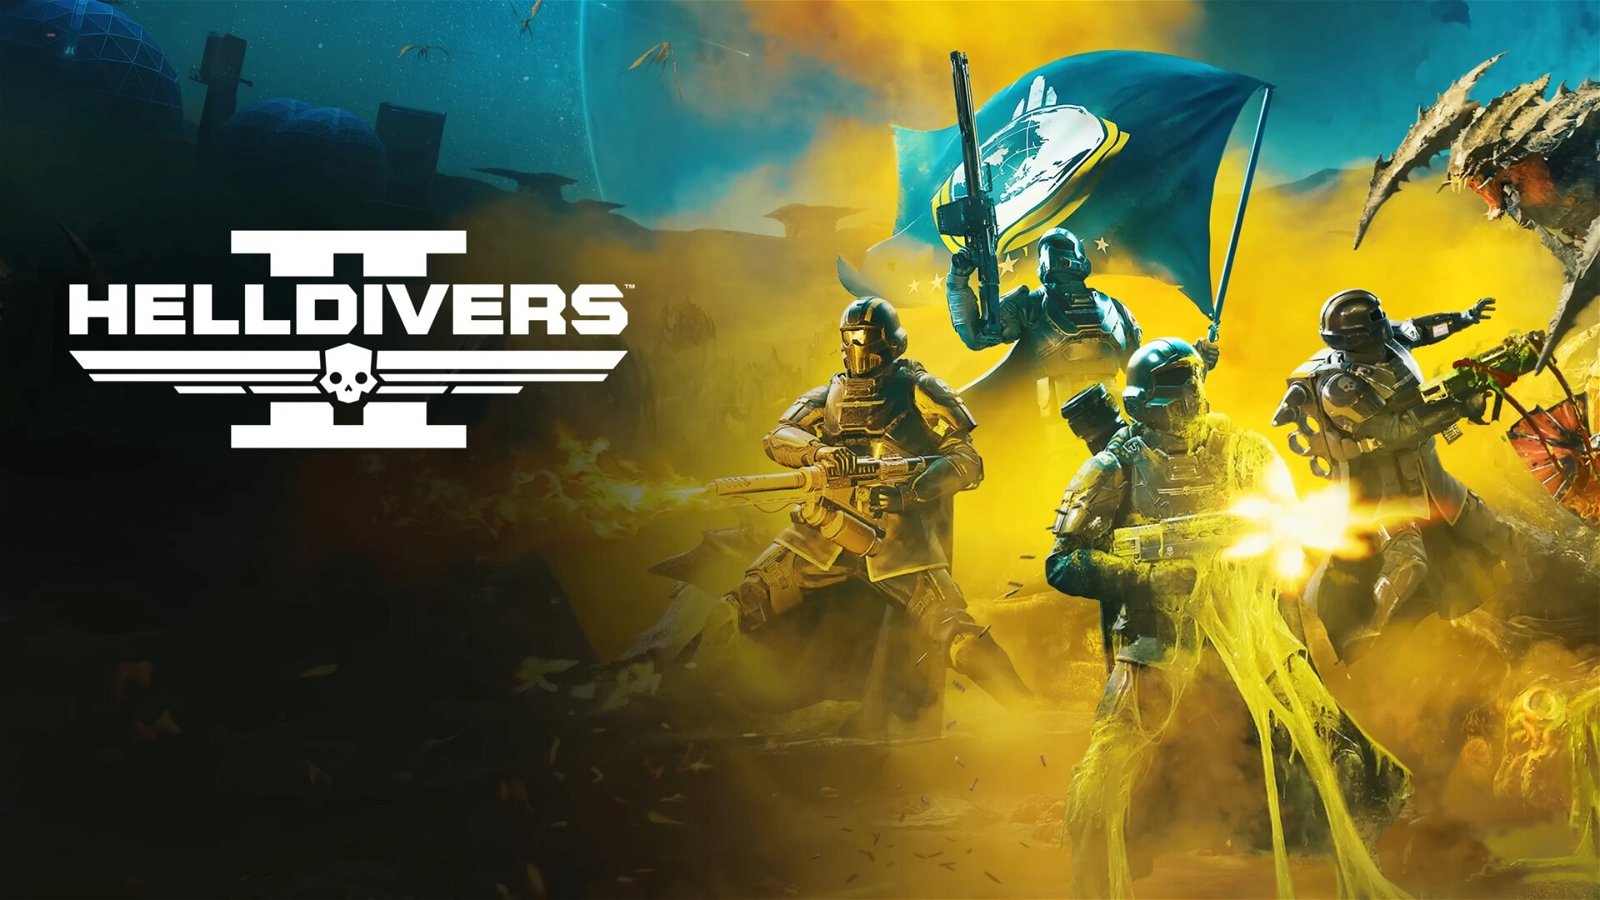 Helldivers 2 PC Requirements Revealed, Supports Crossplay Between PS5 and PC